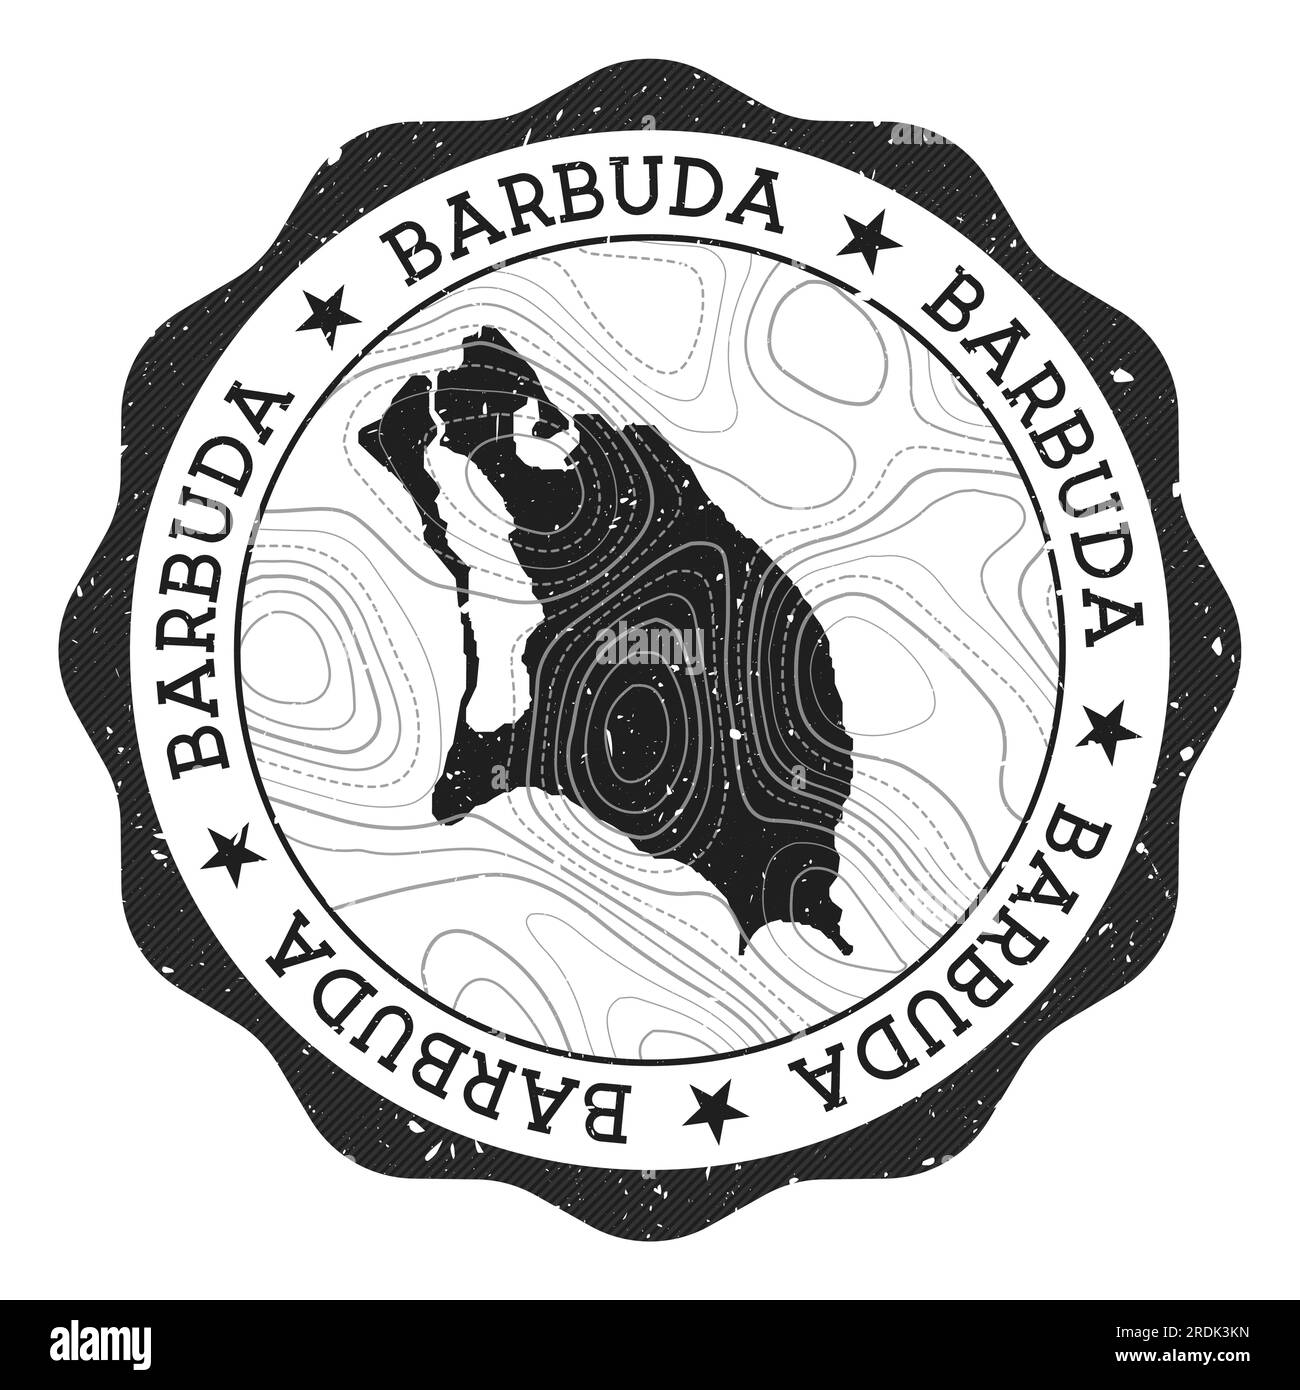 Barbuda outdoor stamp. Round sticker with map of island with topographic isolines. Vector illustration. Can be used as insignia, logotype, label, stic Stock Vector